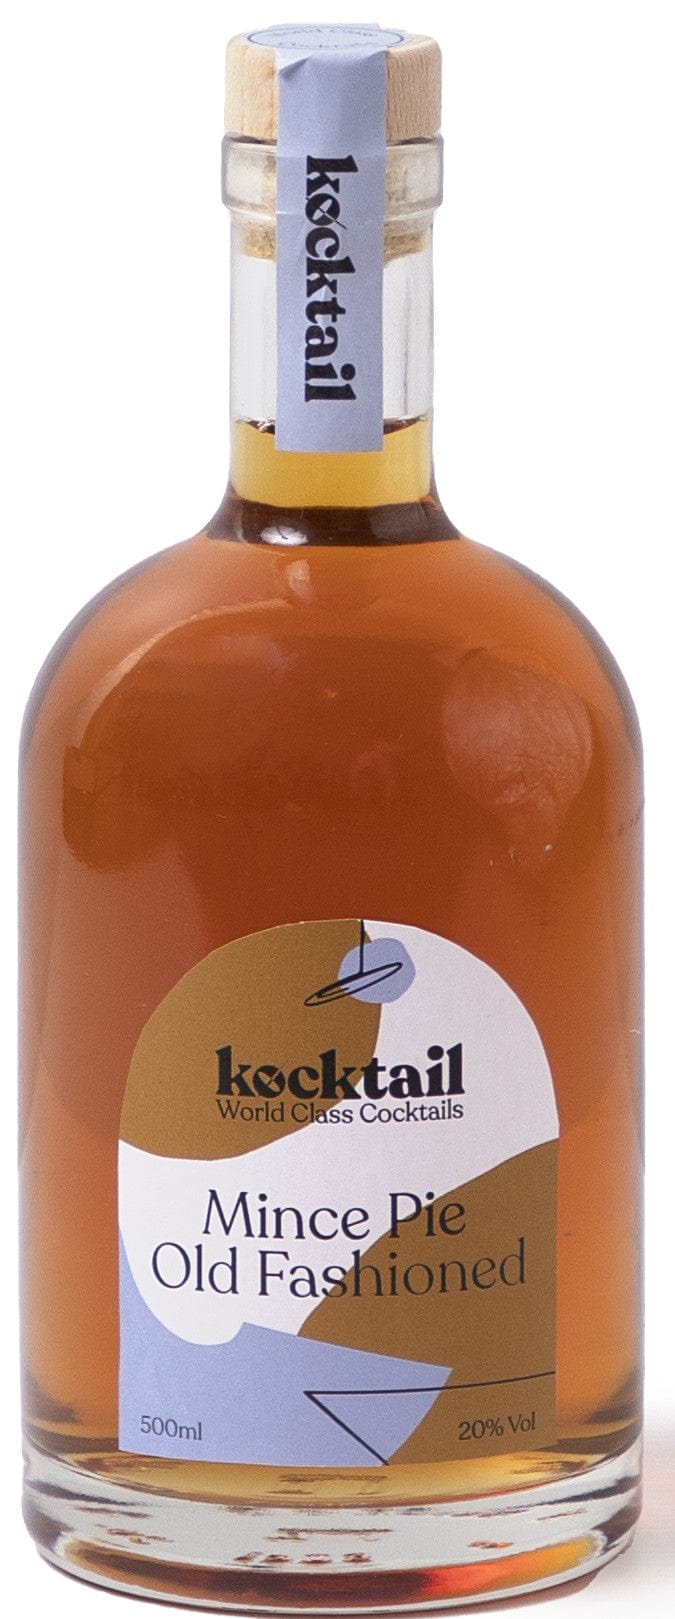 Kocktail Mince Pie Old Fashioned 50cl